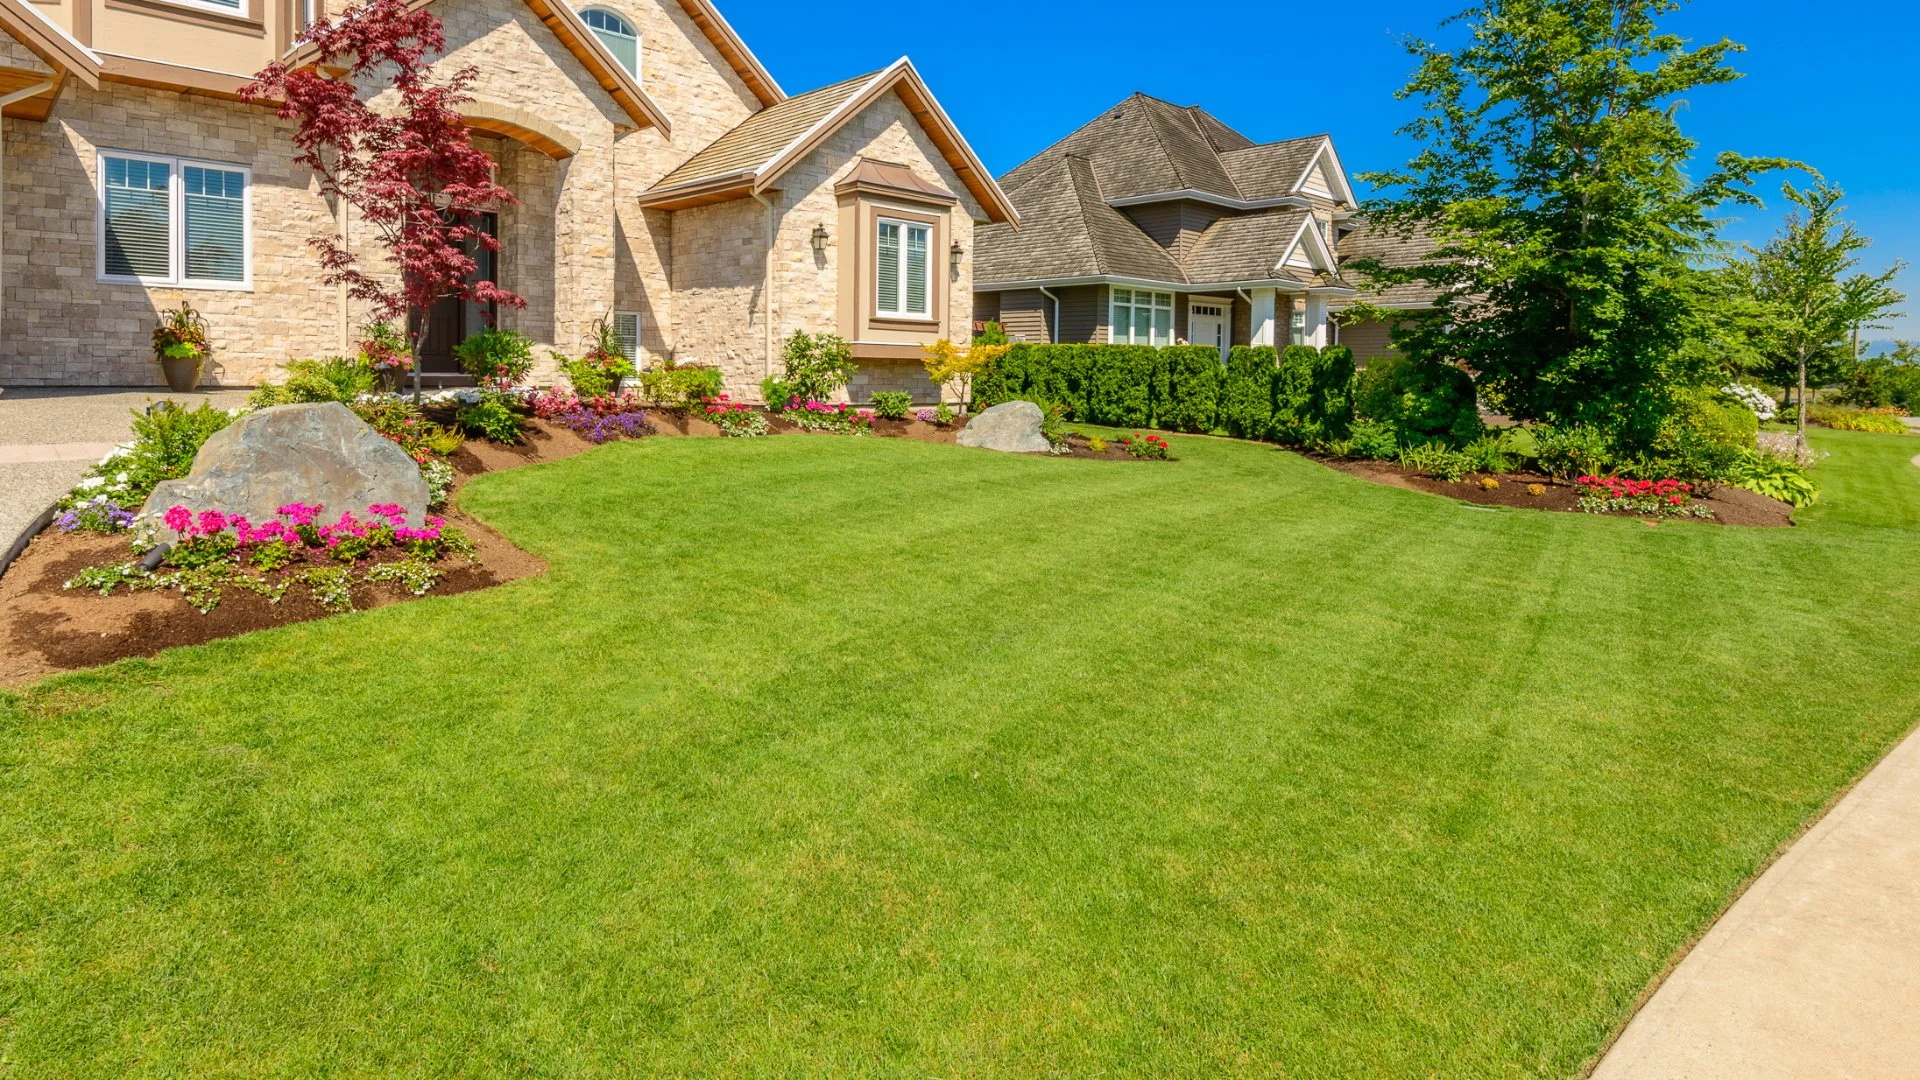 Healthy green lawn and beautiful landscaping at a home in Wilmington, DE.